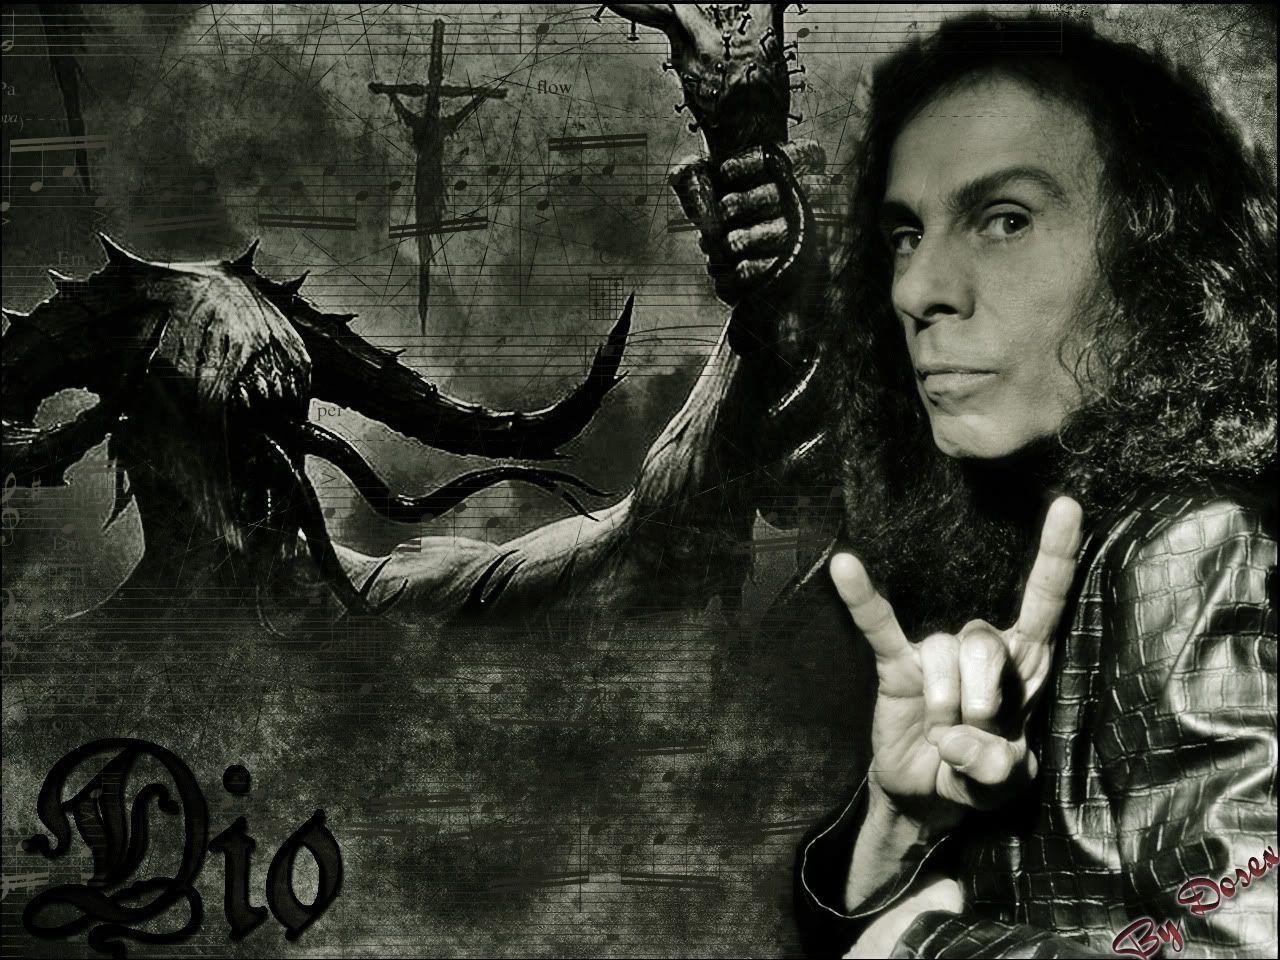 RONNIE JAMES DIO heavy metal poster gd wallpaperx1080. All